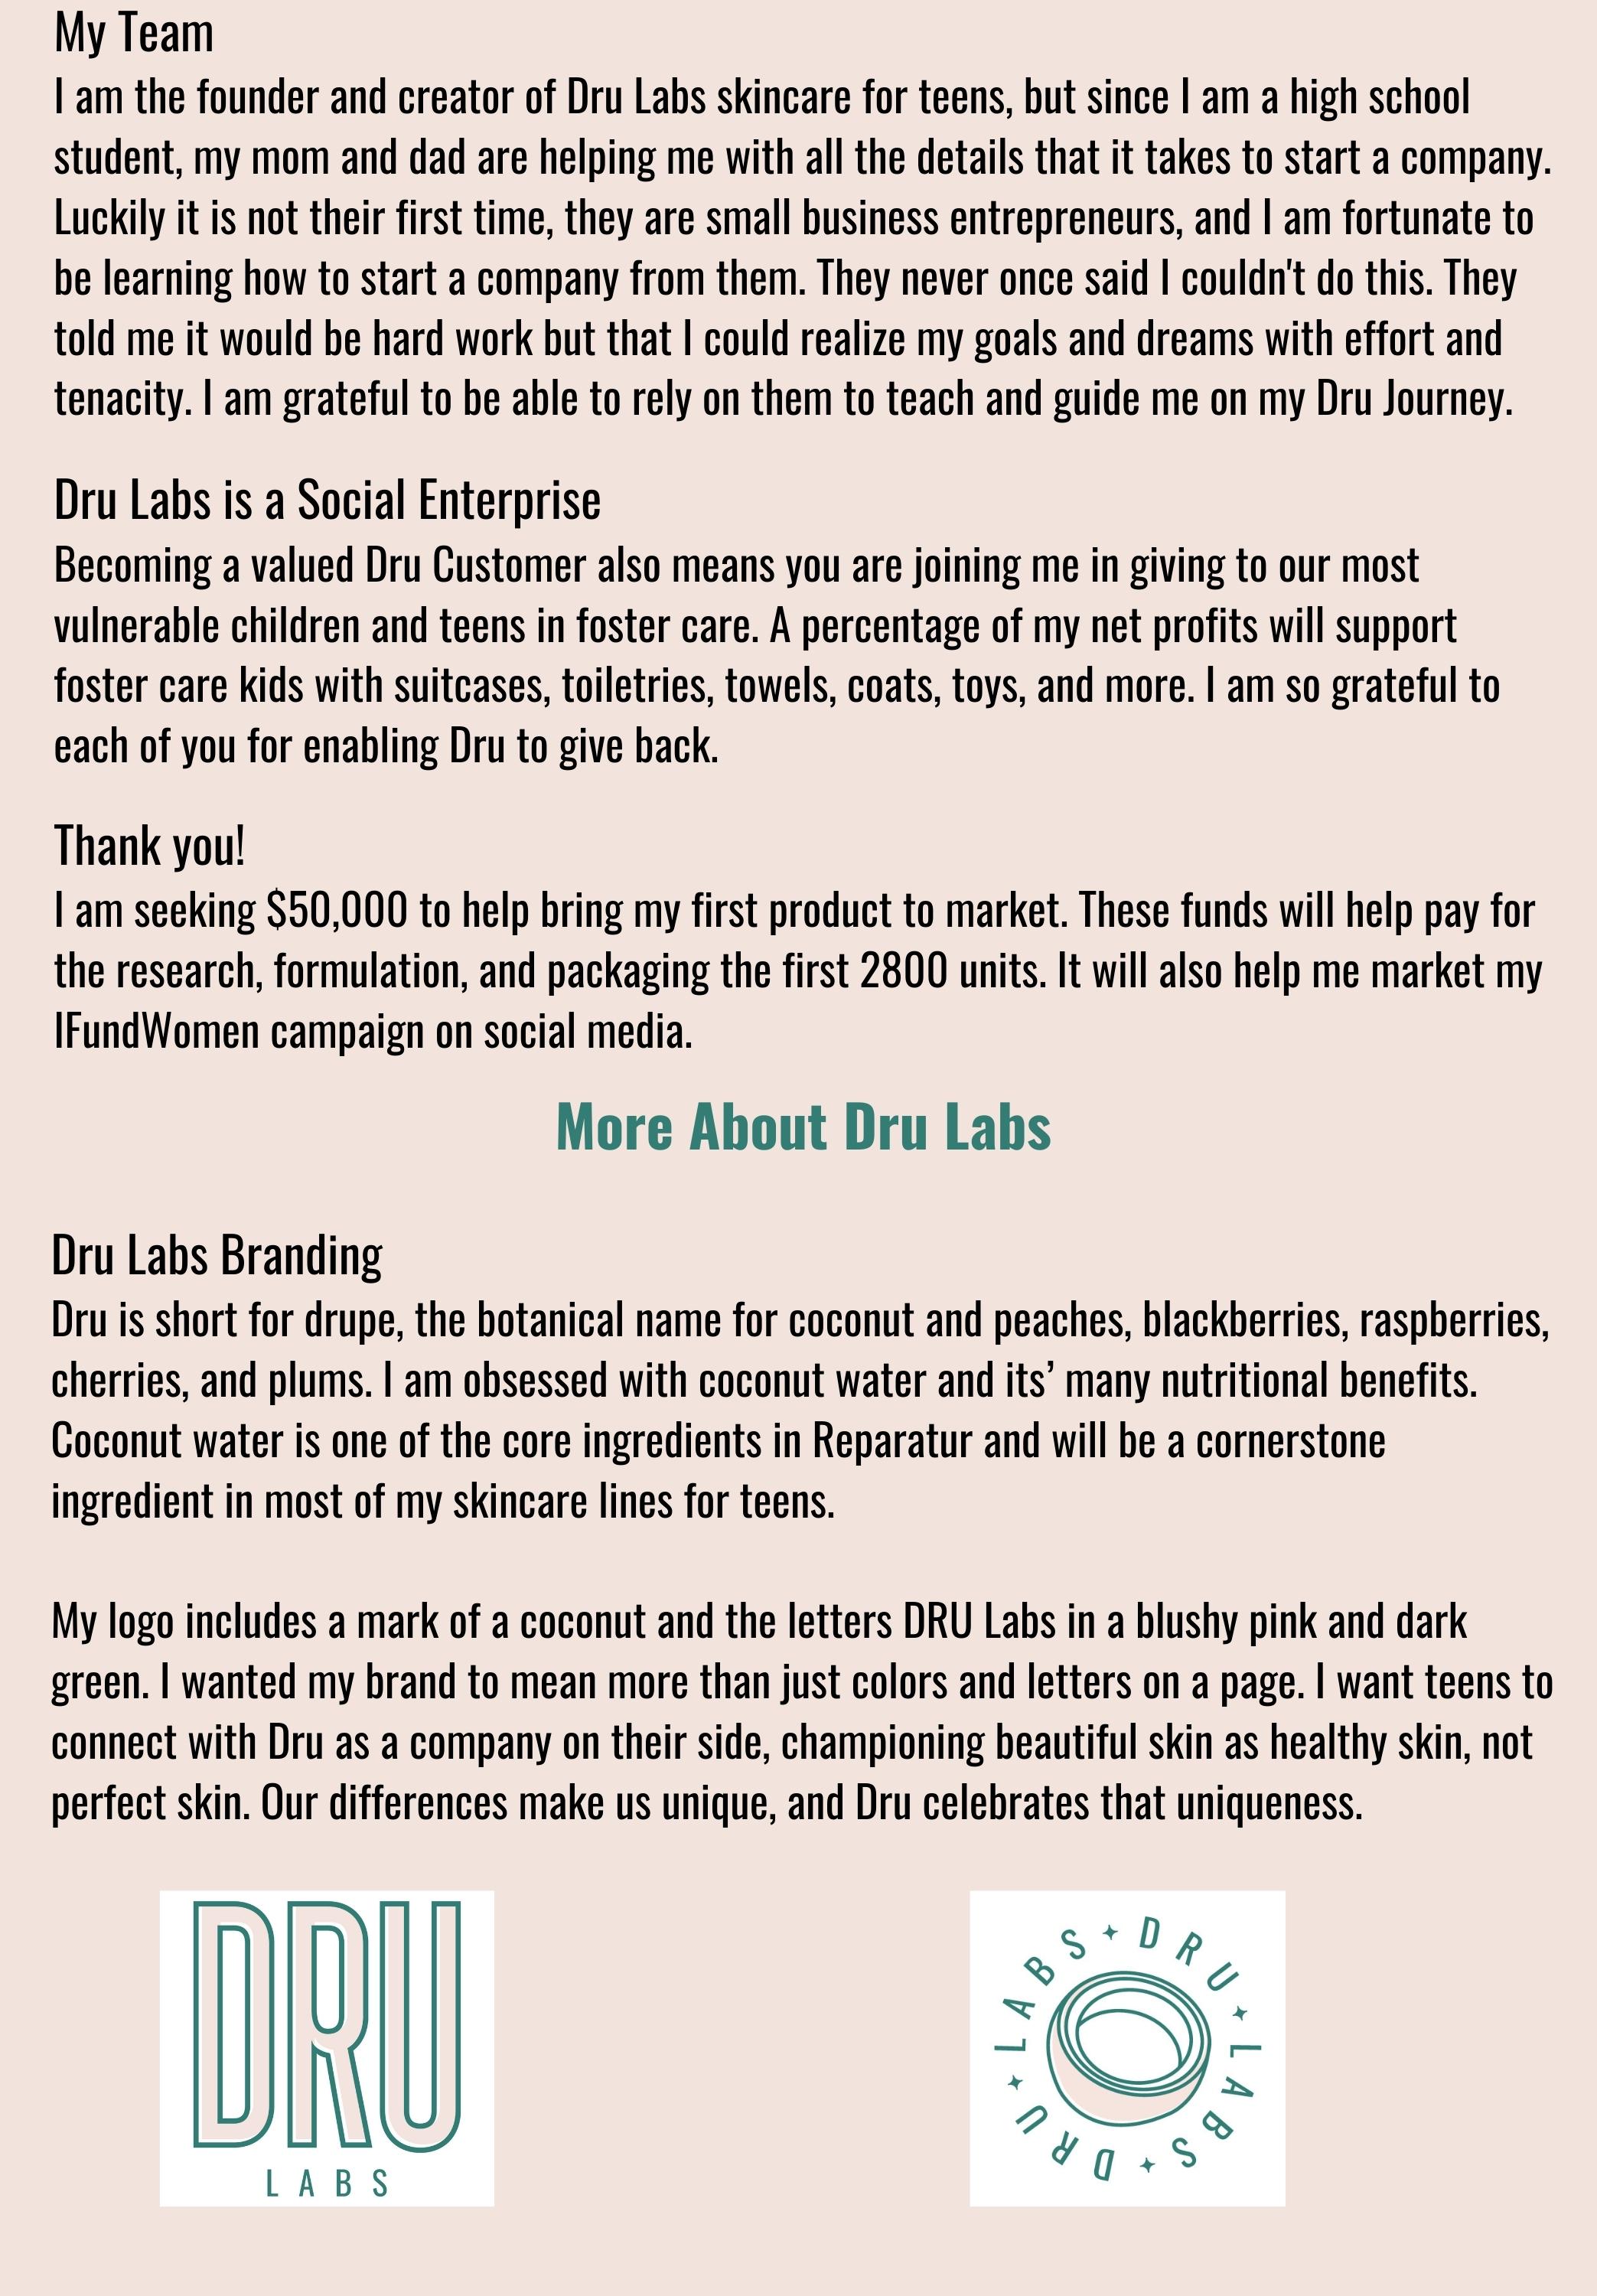 More about Dru Labs